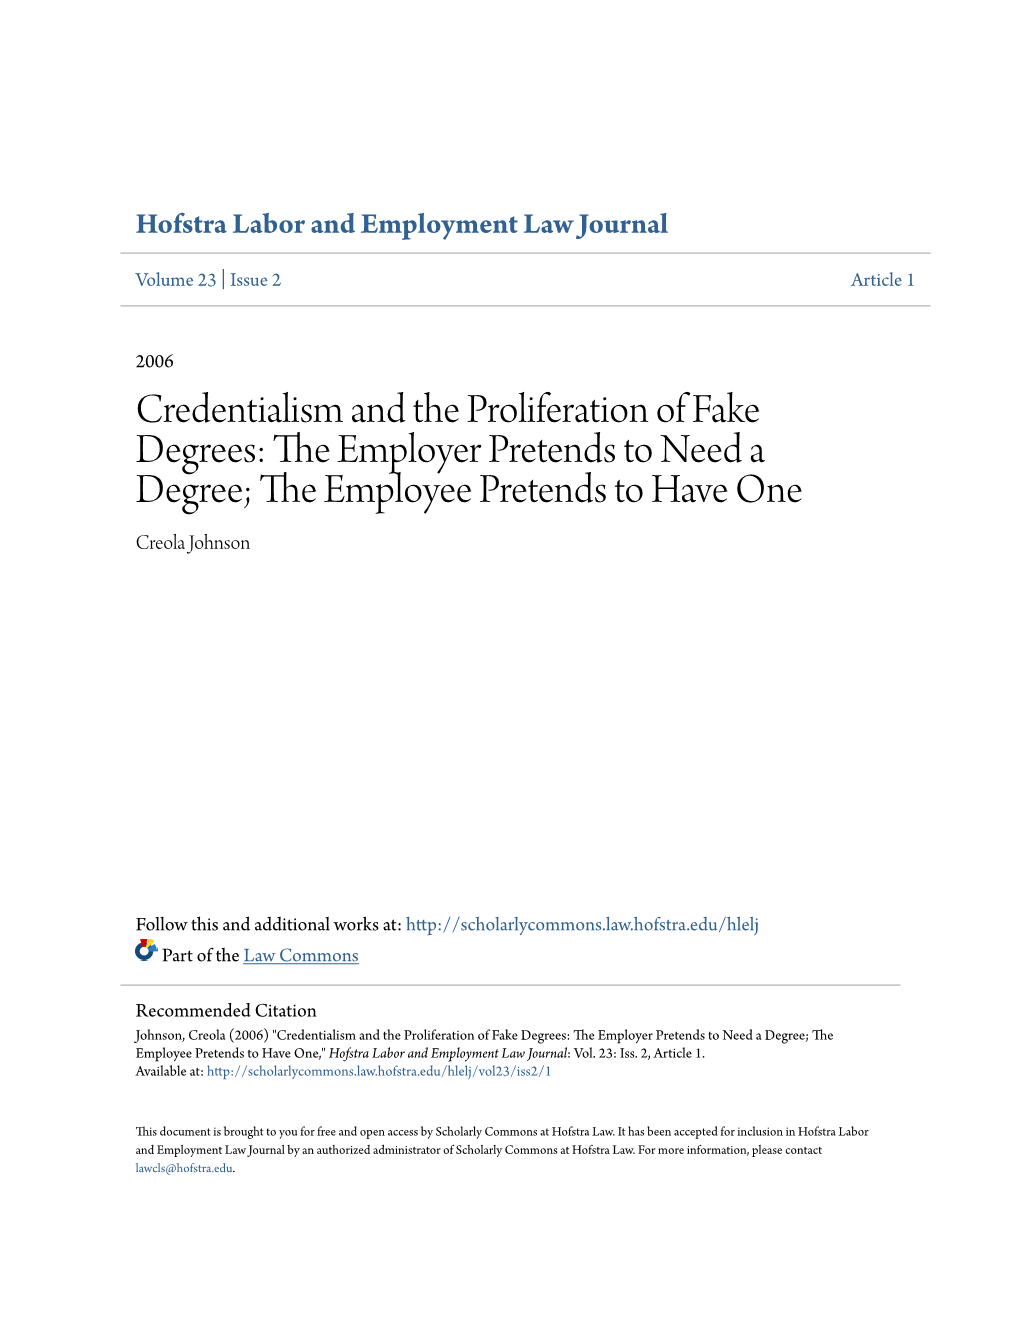 Credentialism and the Proliferation of Fake Degrees: the Employer